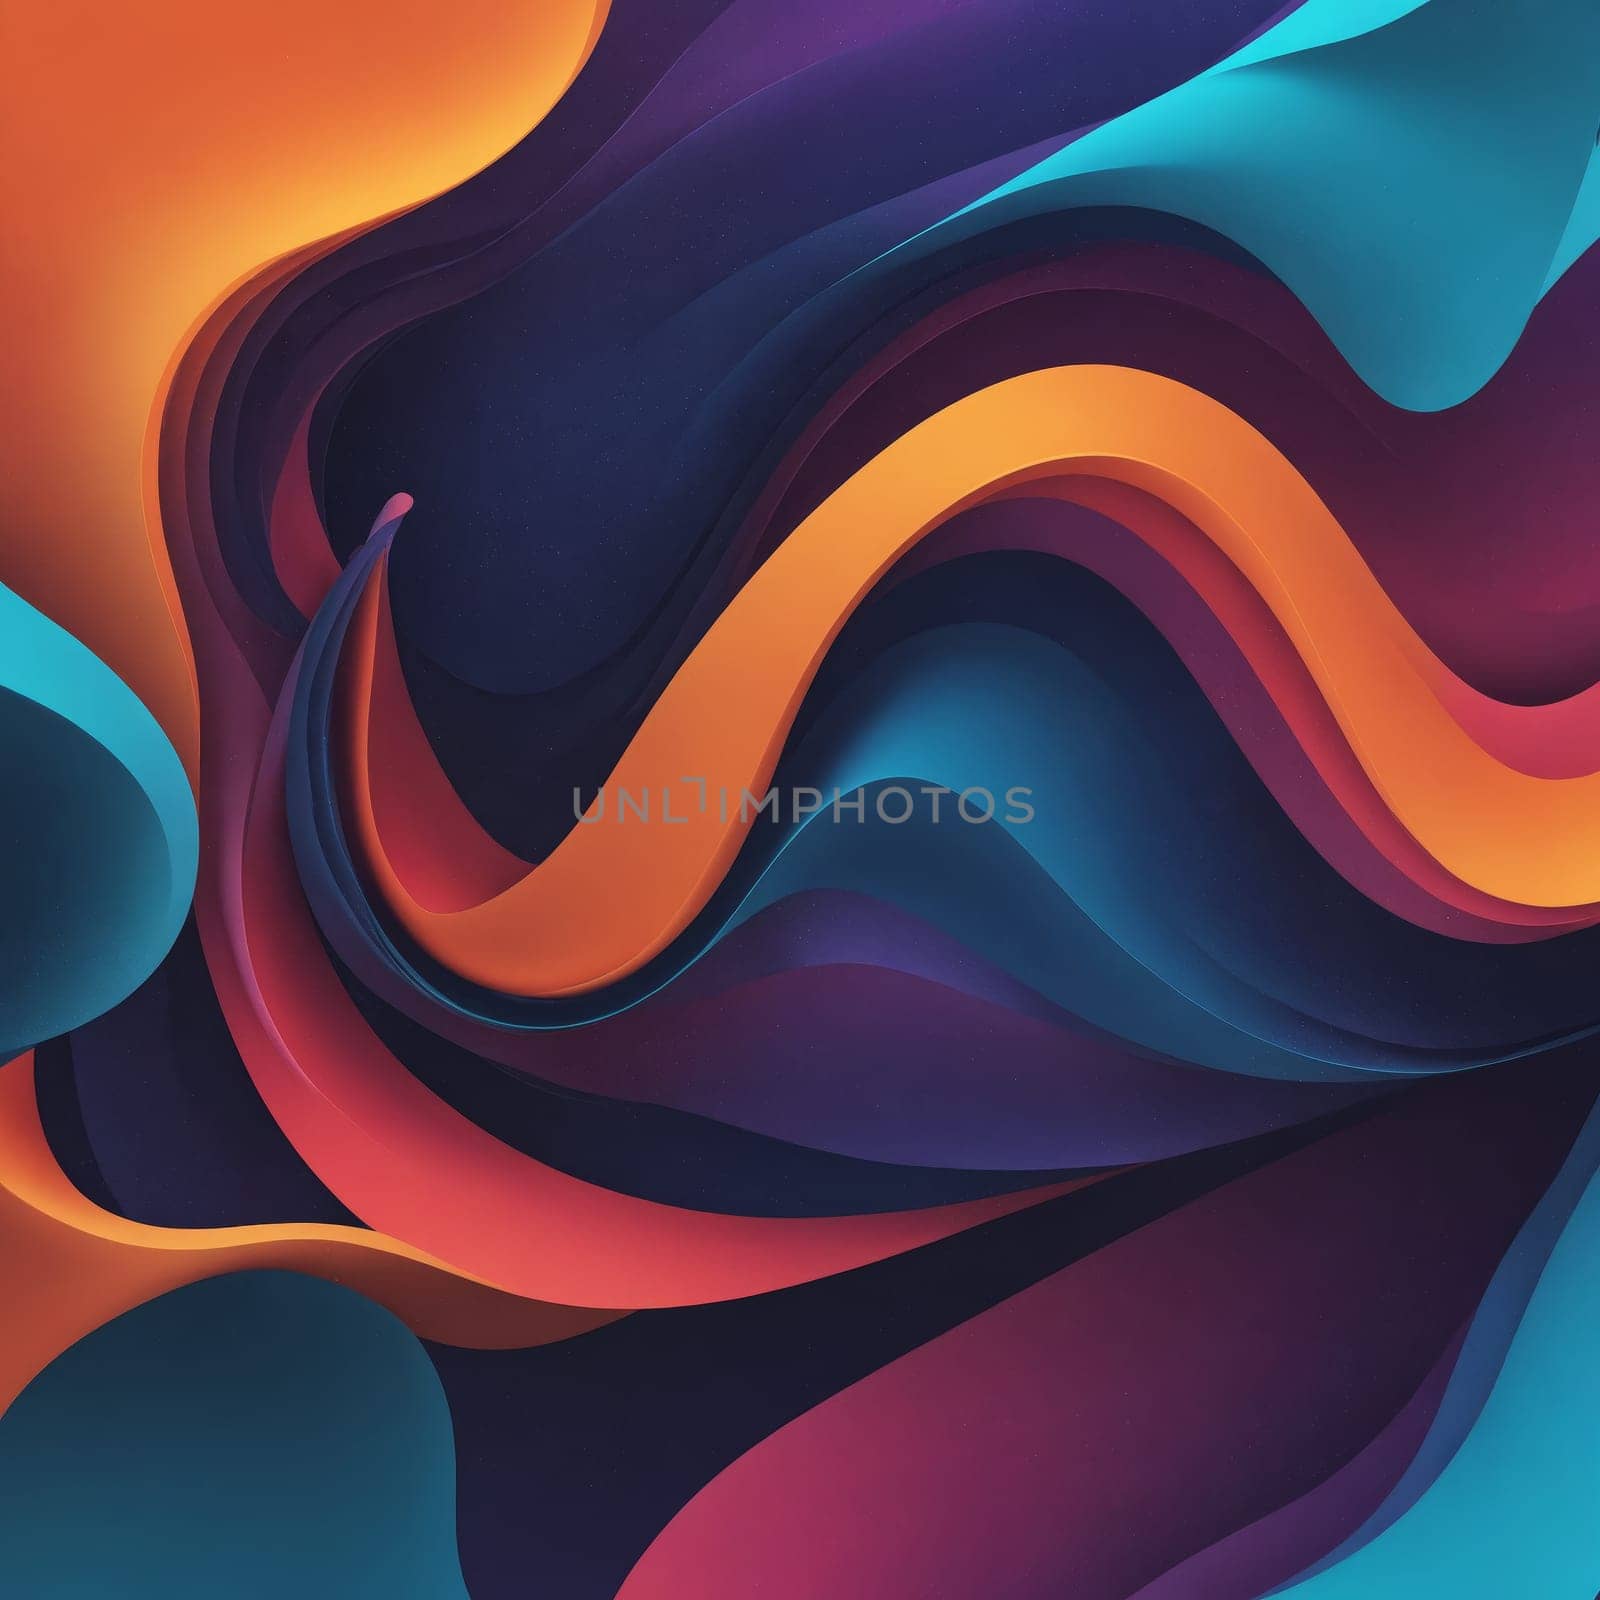 Orange swirl on blue background creates a vibrant art pattern by Andre1ns